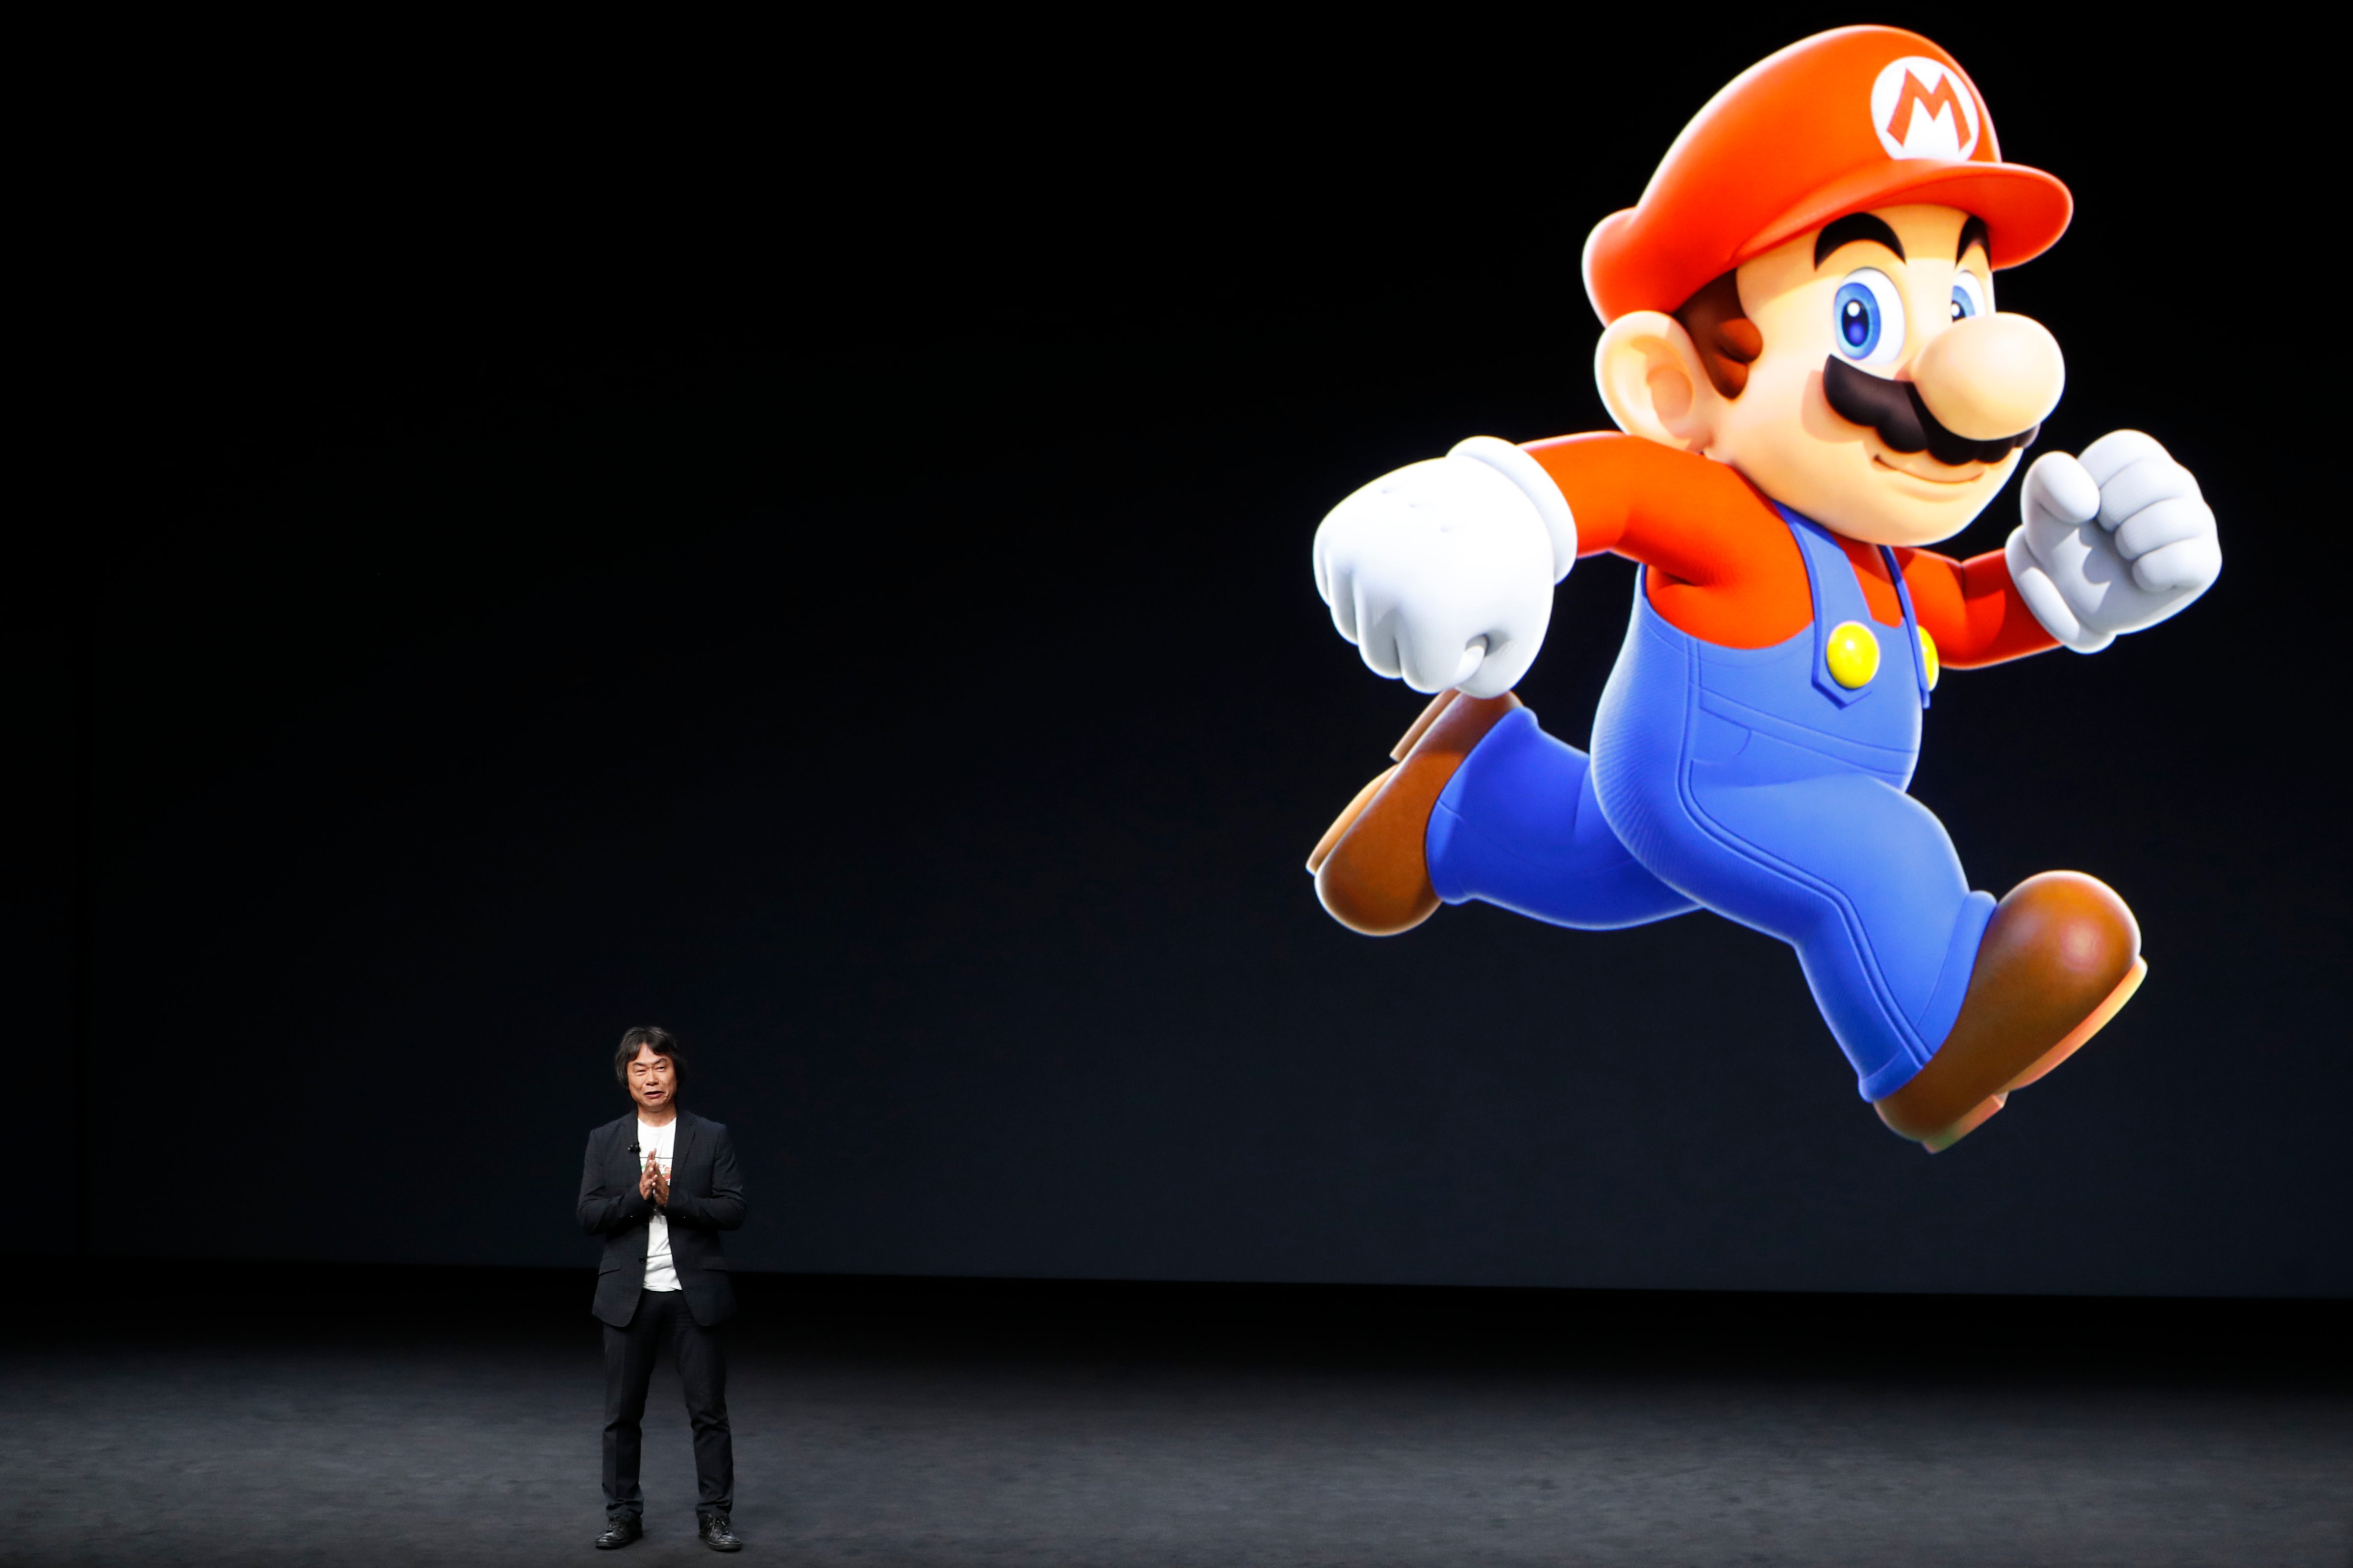 Shigeru Miyamoto, creative fellow at Nintendo and creator of Super Mario, speaks on stage during an Apple launch event on September 7, 2016 in San Francisco, California. (Stephen Lam—Getty Images)